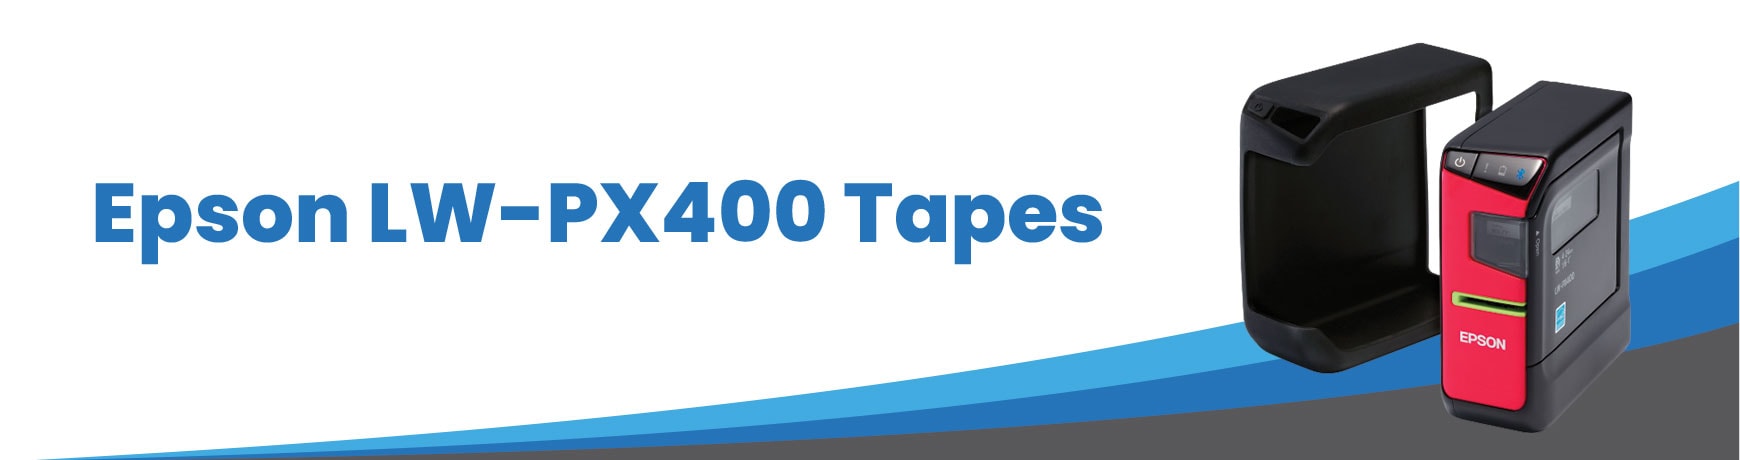 Epson LW-PX400 Tapes